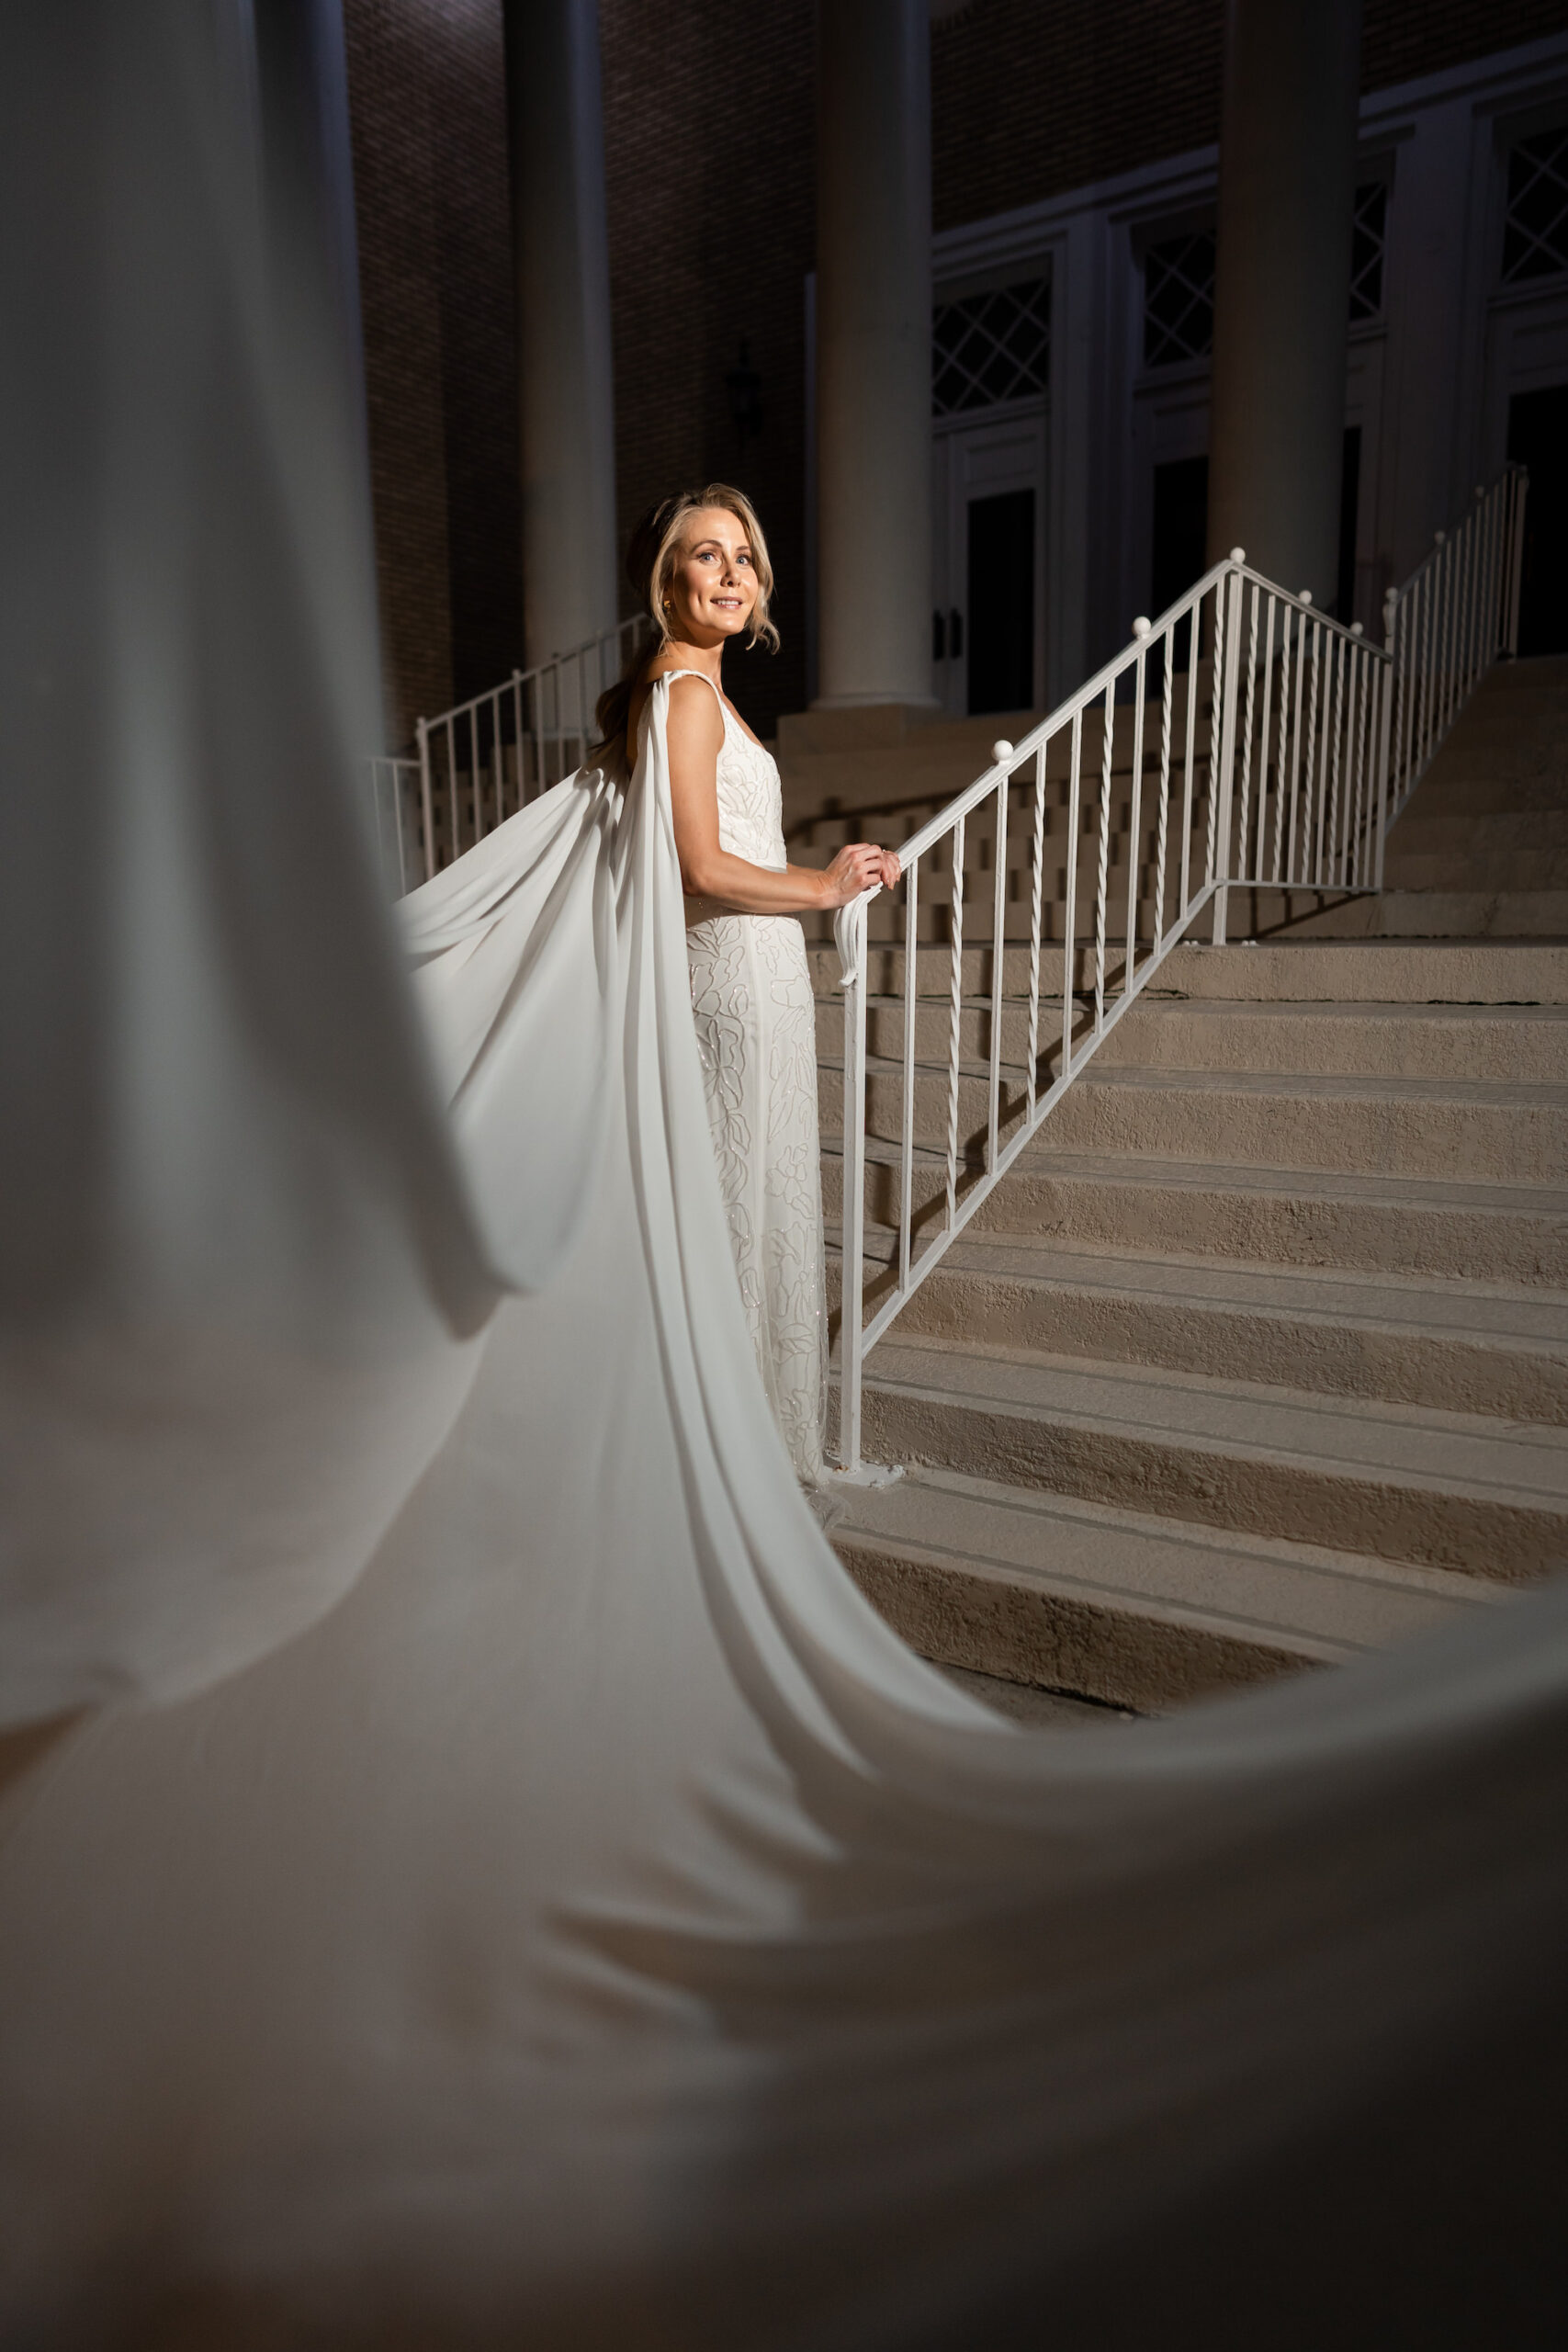 Unique Bridal Portrait with Flowing Dress | South Tampa Hair and Makeup Artist Femme Akoi Beauty Studio